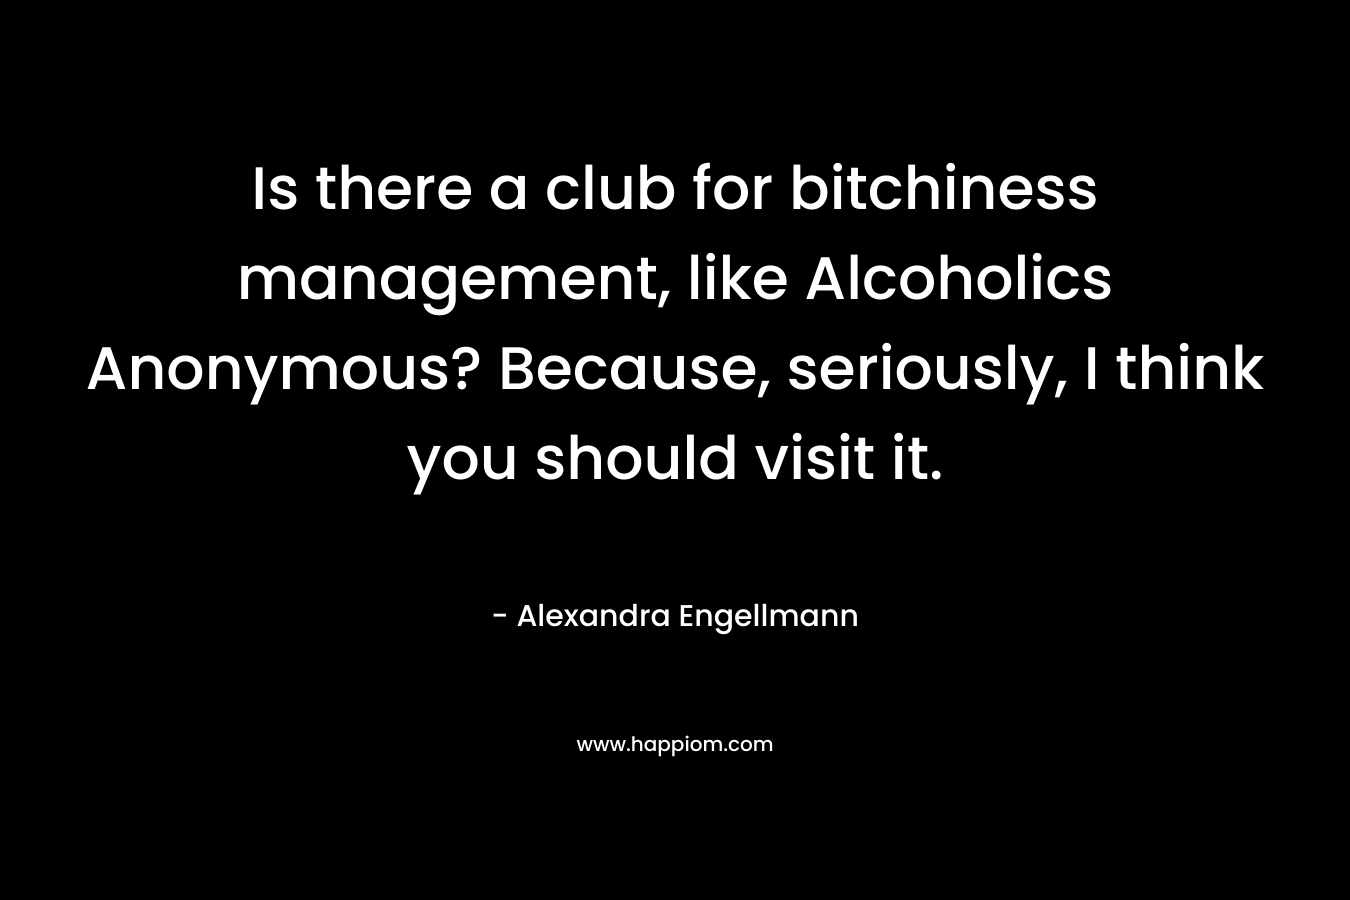 Is there a club for bitchiness management, like Alcoholics Anonymous? Because, seriously, I think you should visit it. – Alexandra Engellmann